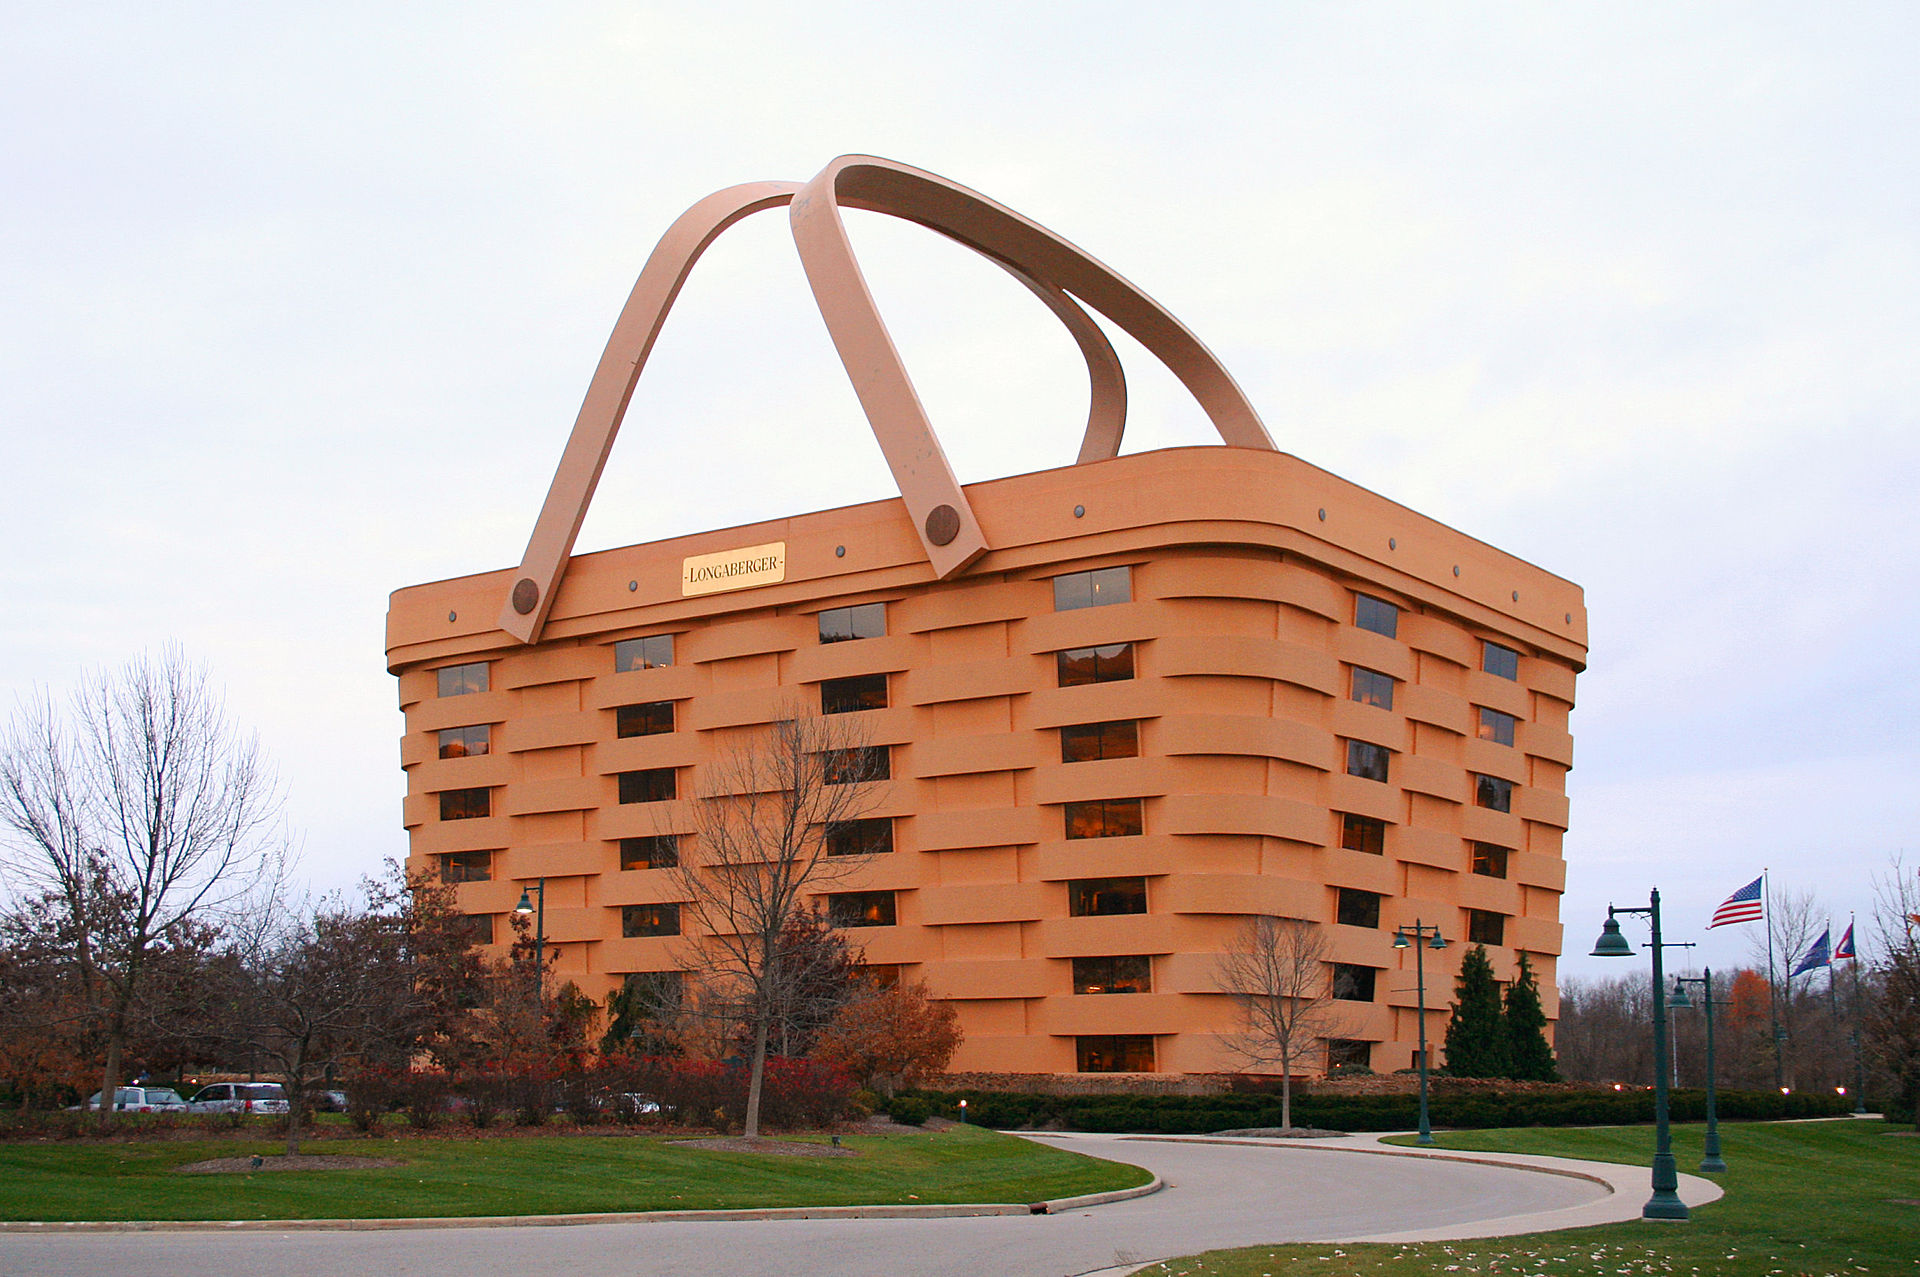 7 Buildings That Look Exactly Like What Happens Inside